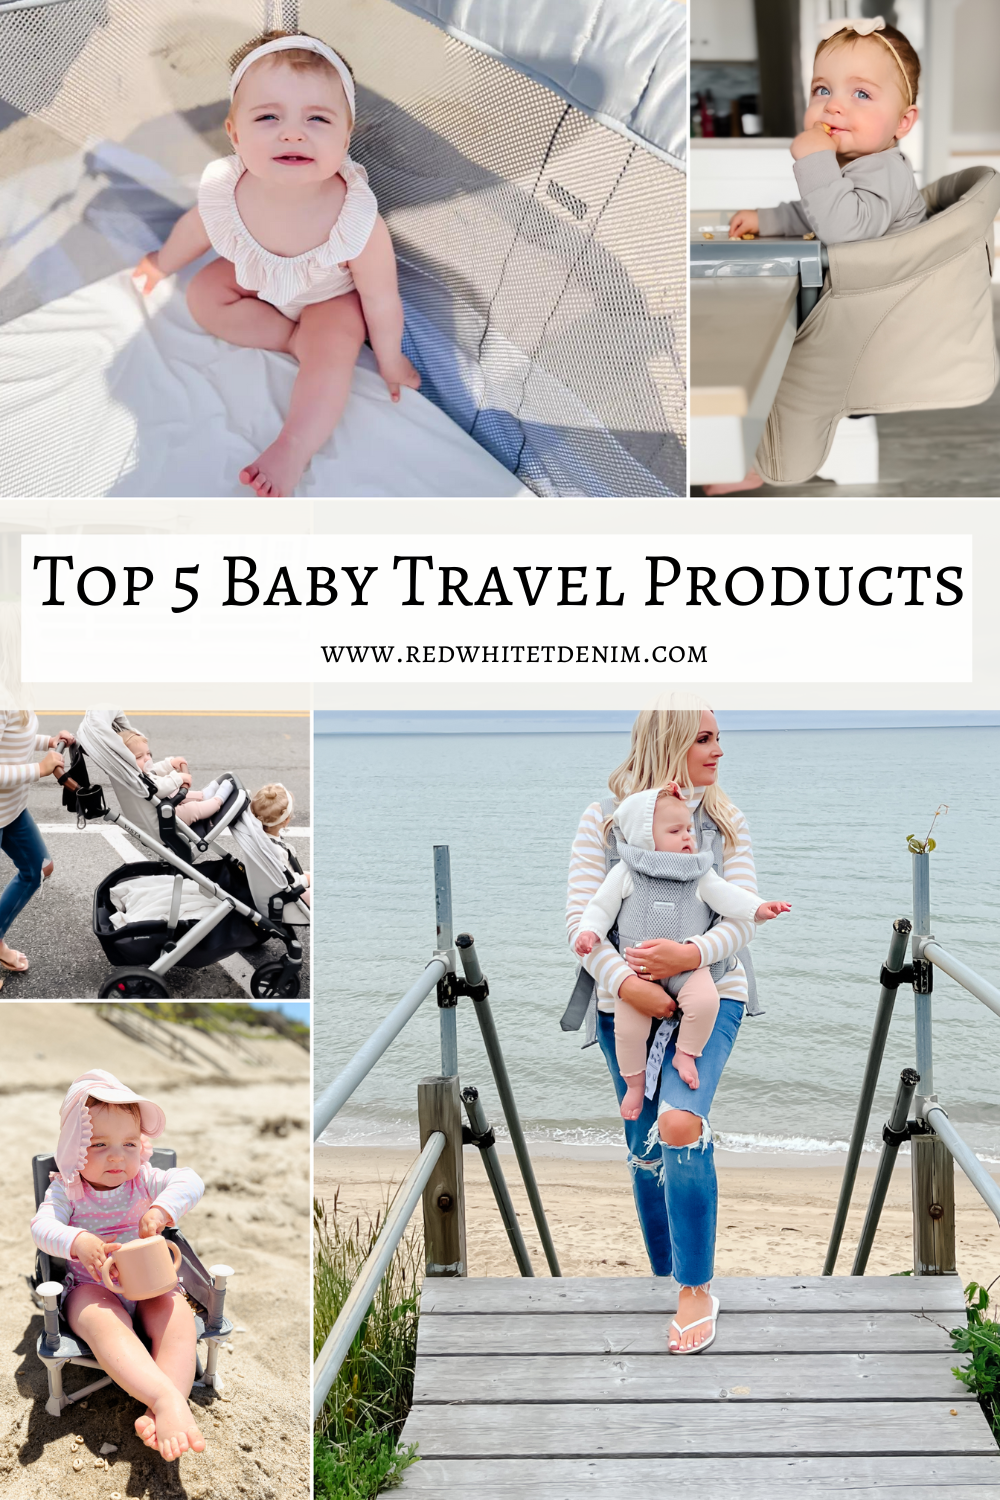 https://redwhitedenim.com/wp-content/uploads/2022/07/Top-5-Baby-Travel-Products.png